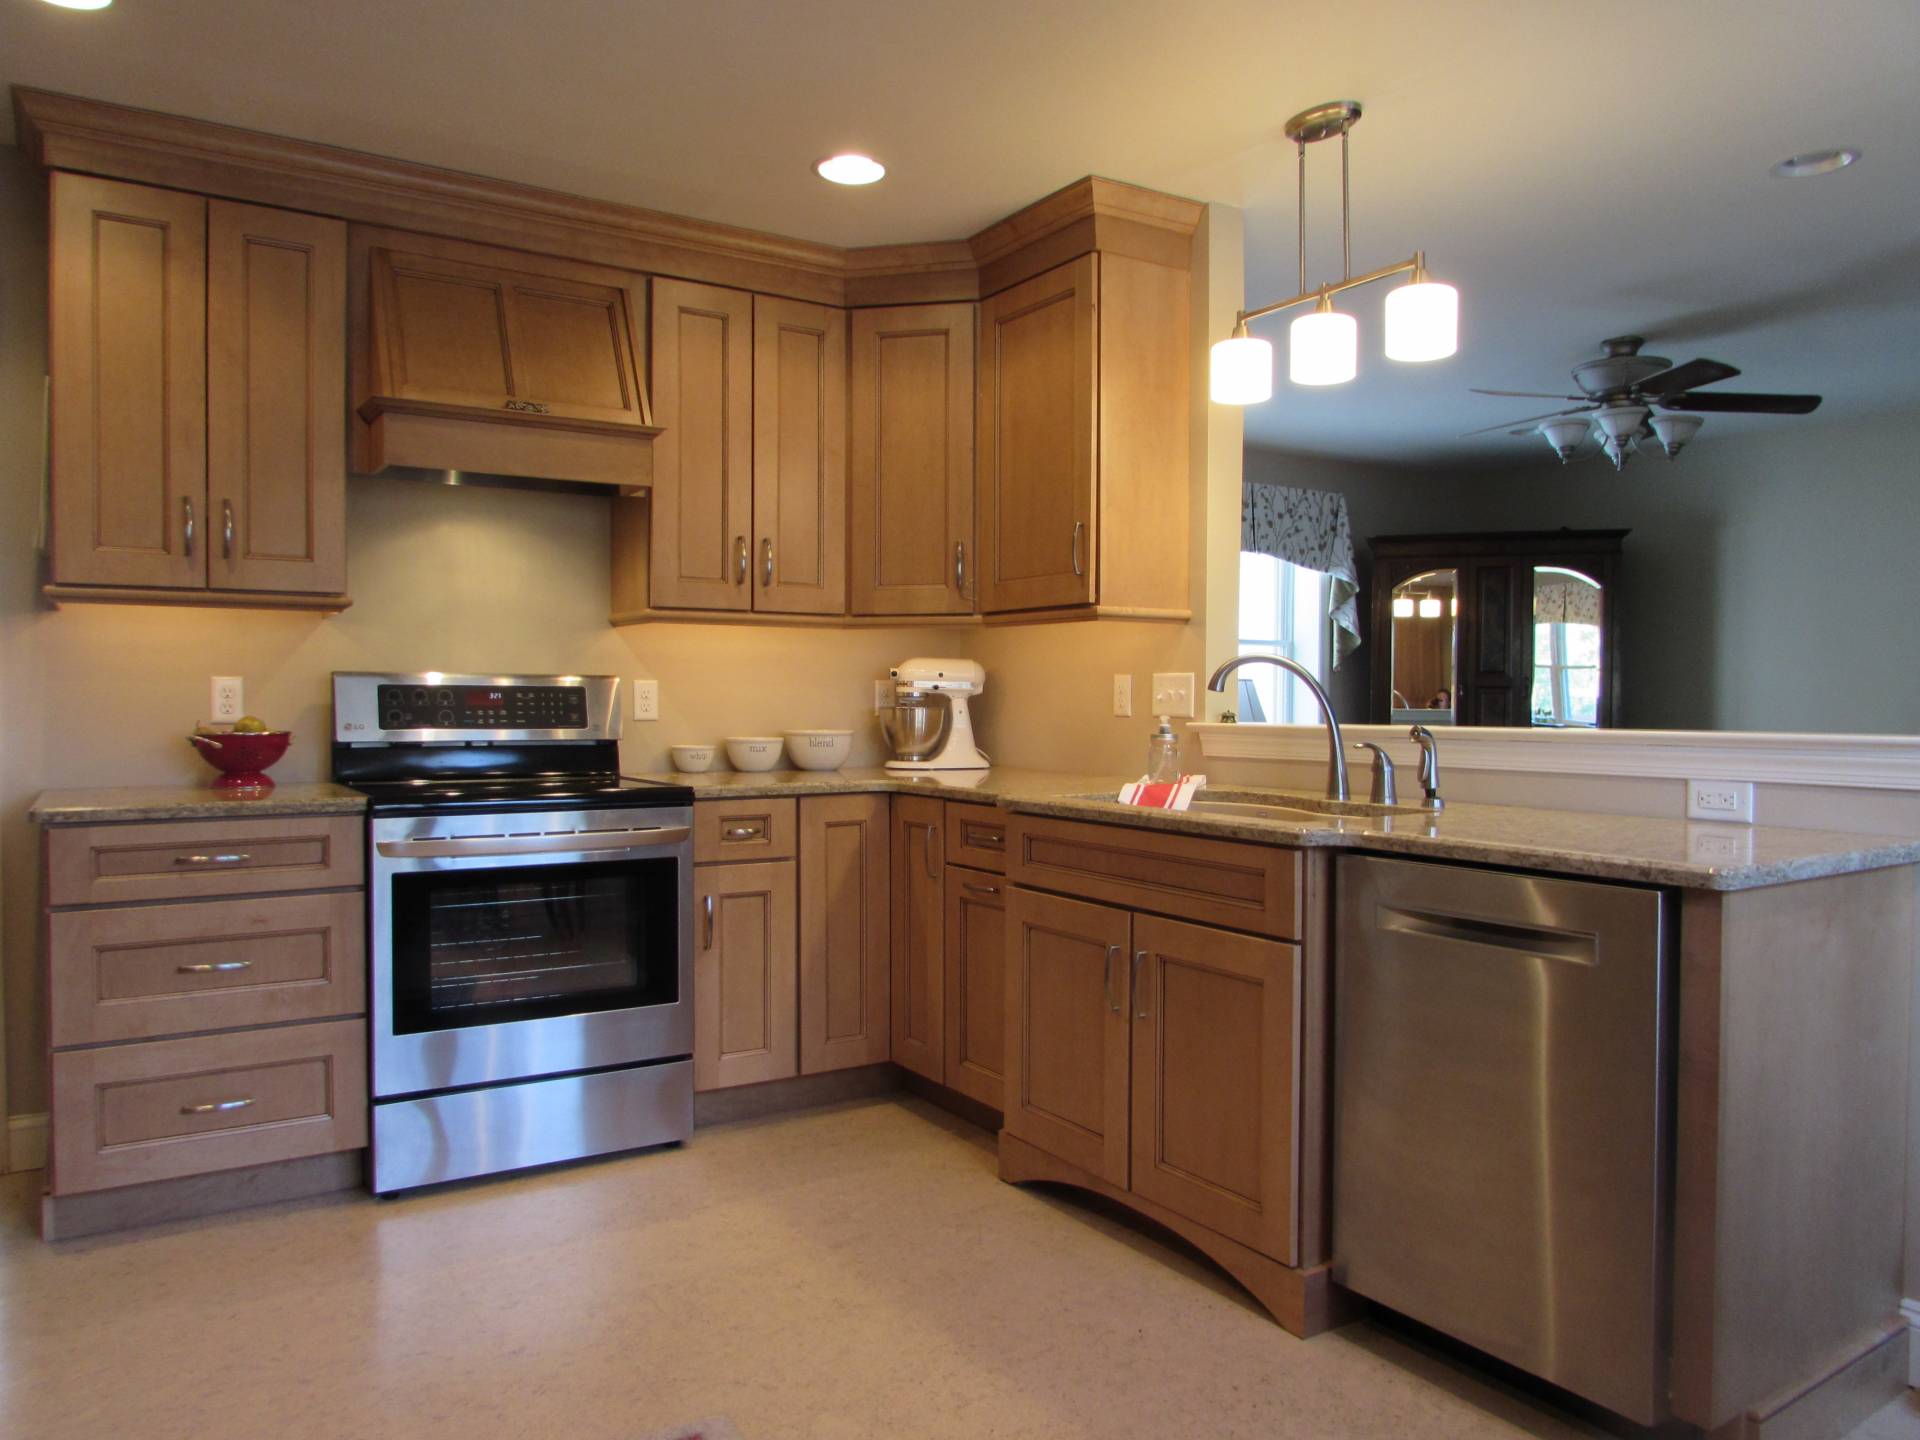 Lancaster Kitchen Choice Home Remodeling